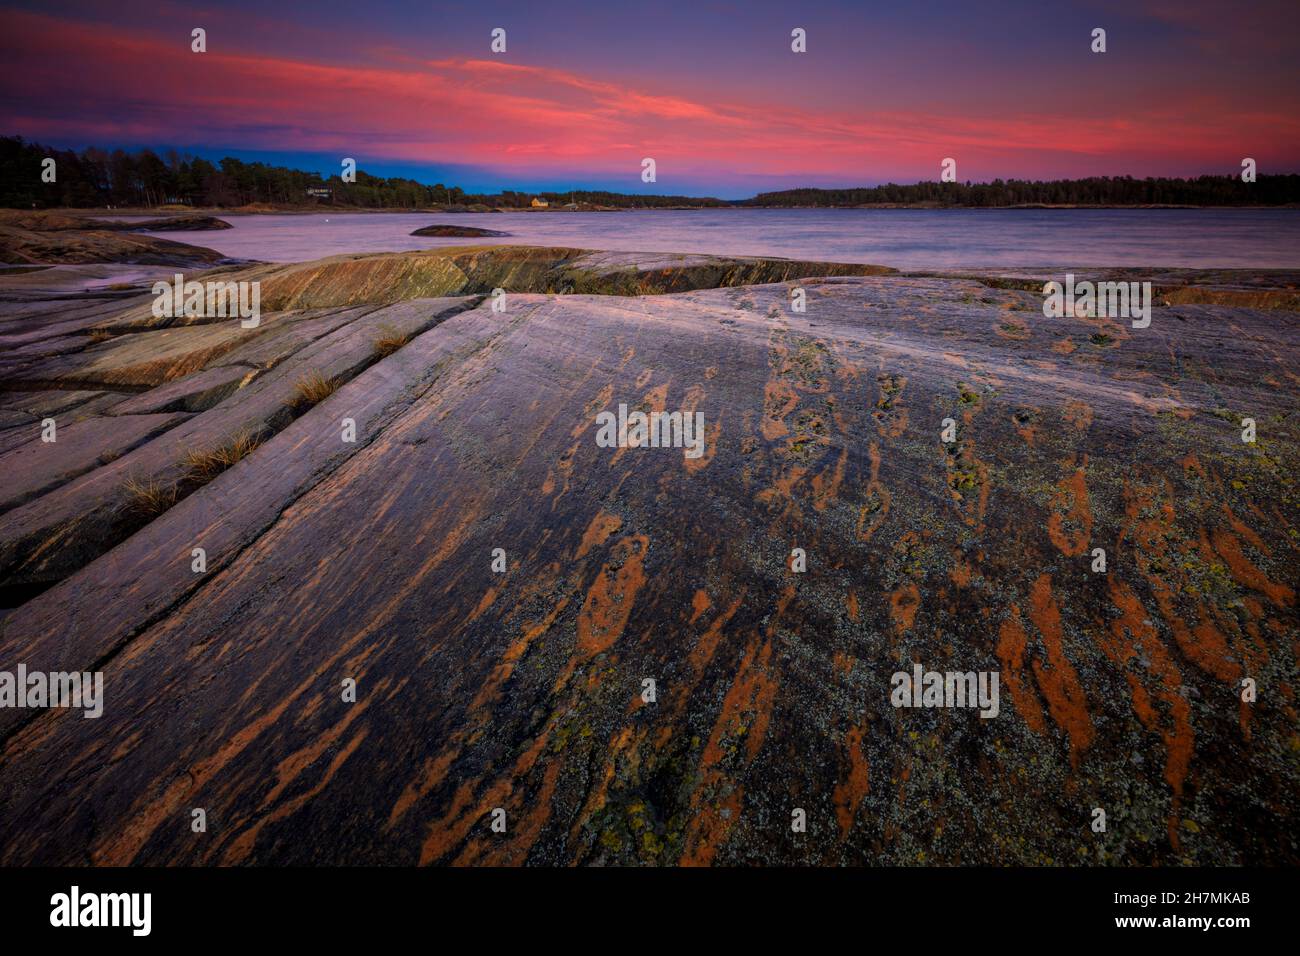 Beautiful rock formations and colorful skies at twilight at Oven, by the coastline of the Oslofjord, Østfold, Norway, Scandinavia. Stock Photo